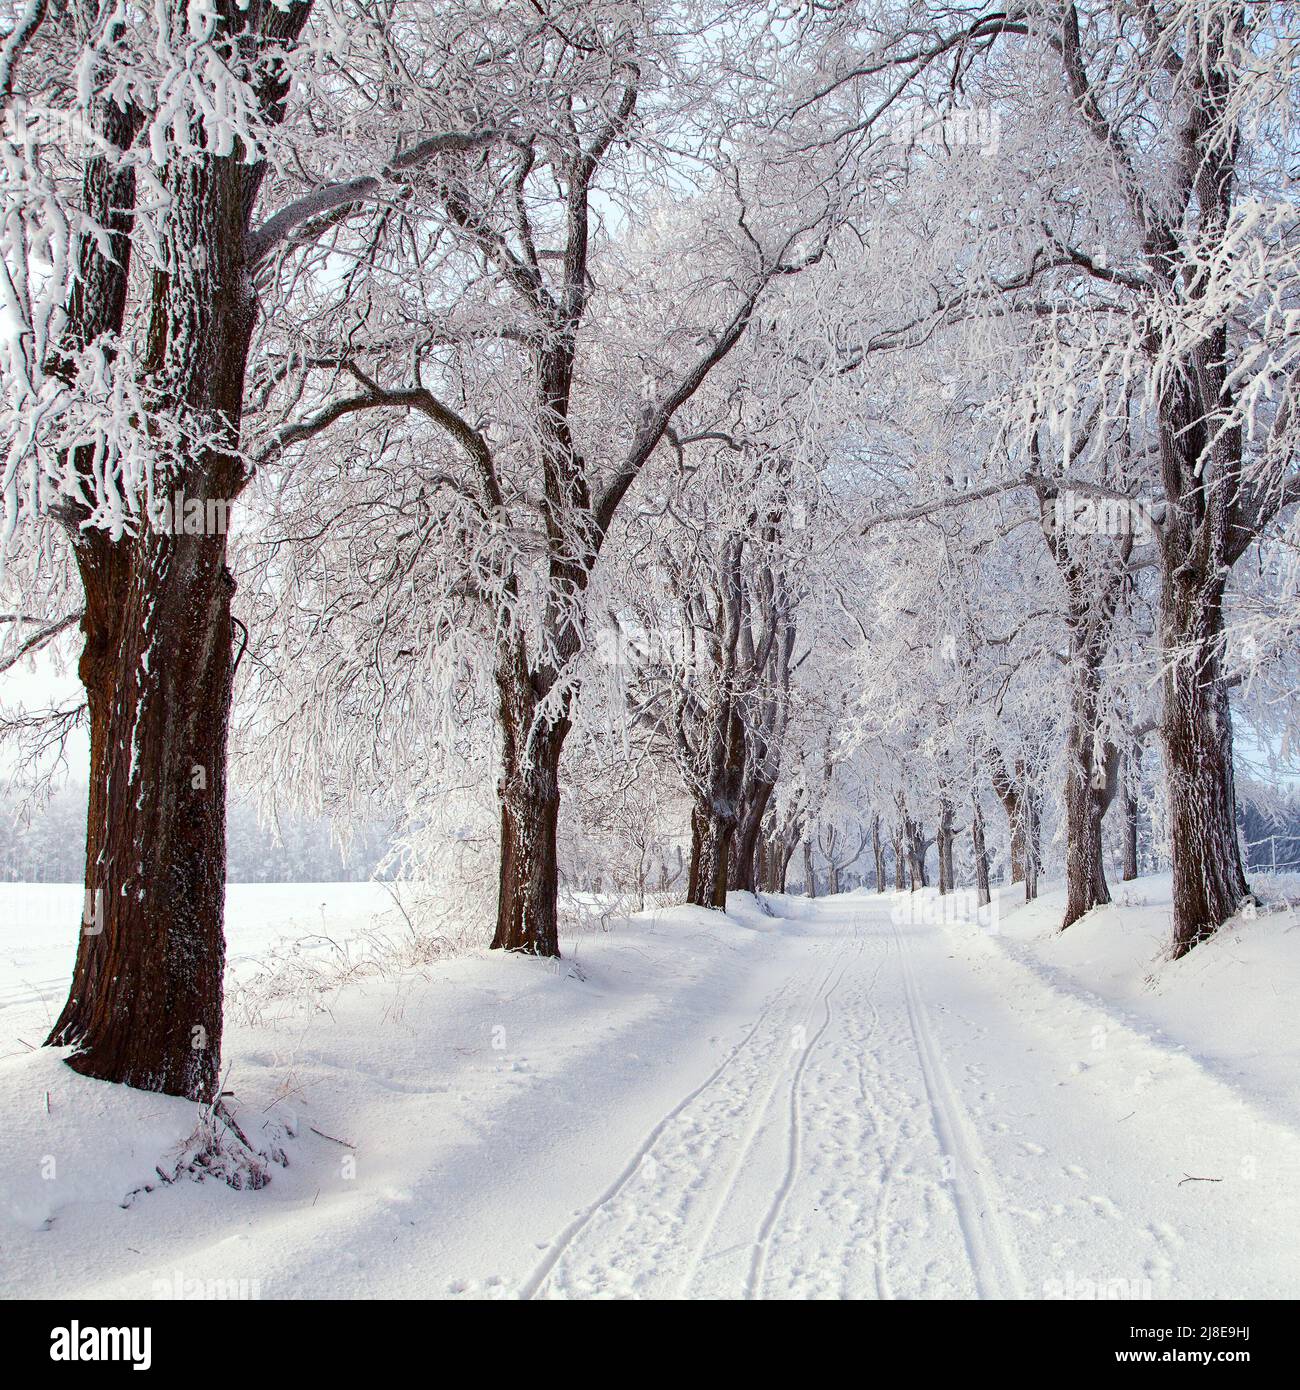 wintry landscape scenery with road way and alley of tree Stock Photo